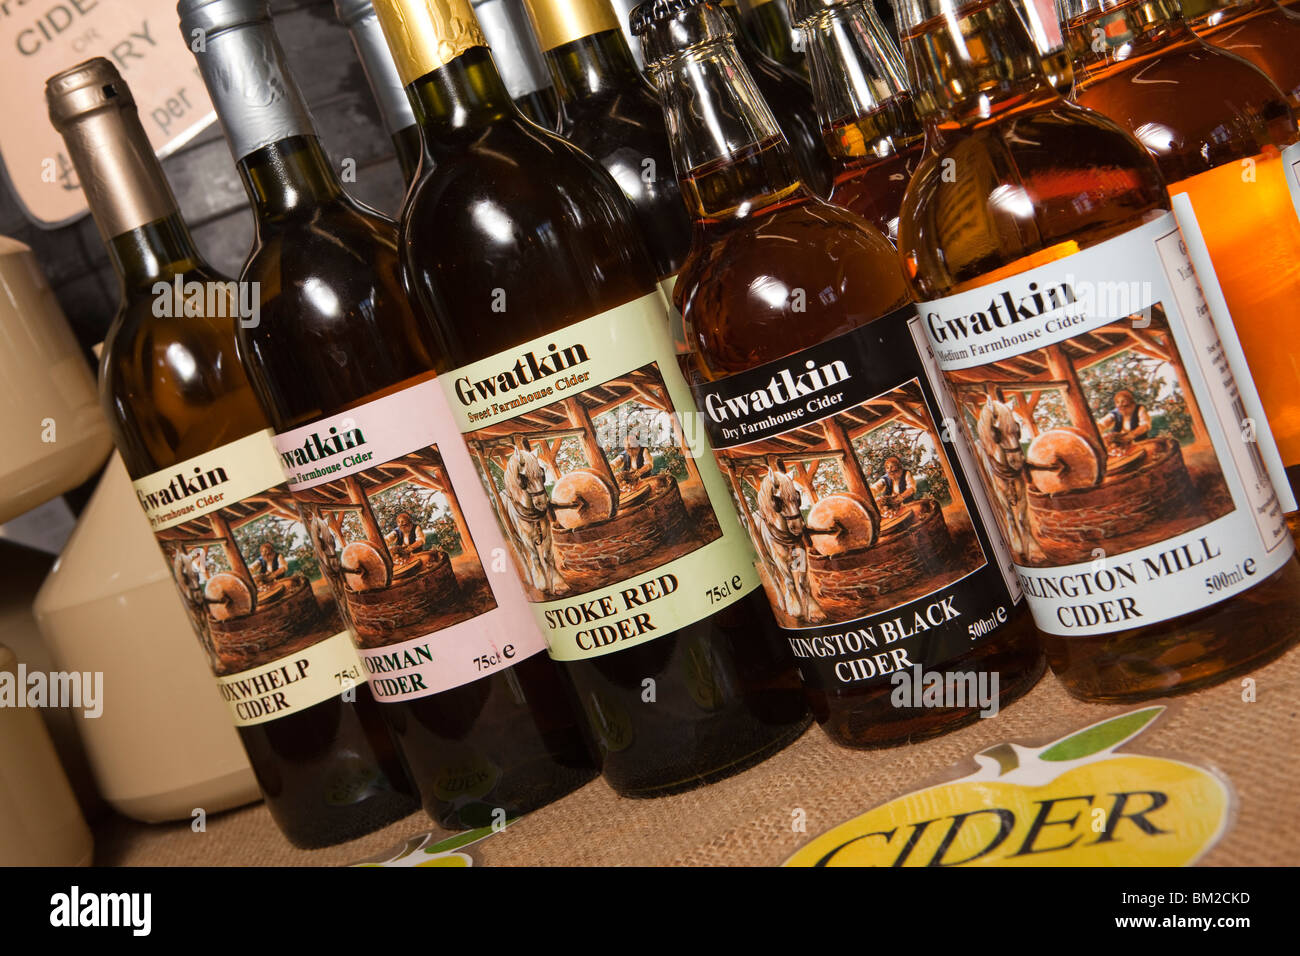 UK, England, Herefordshire, Putley, Big Apple Event, Gwatkin farmhouse cider products, bottles of ciders Stock Photo